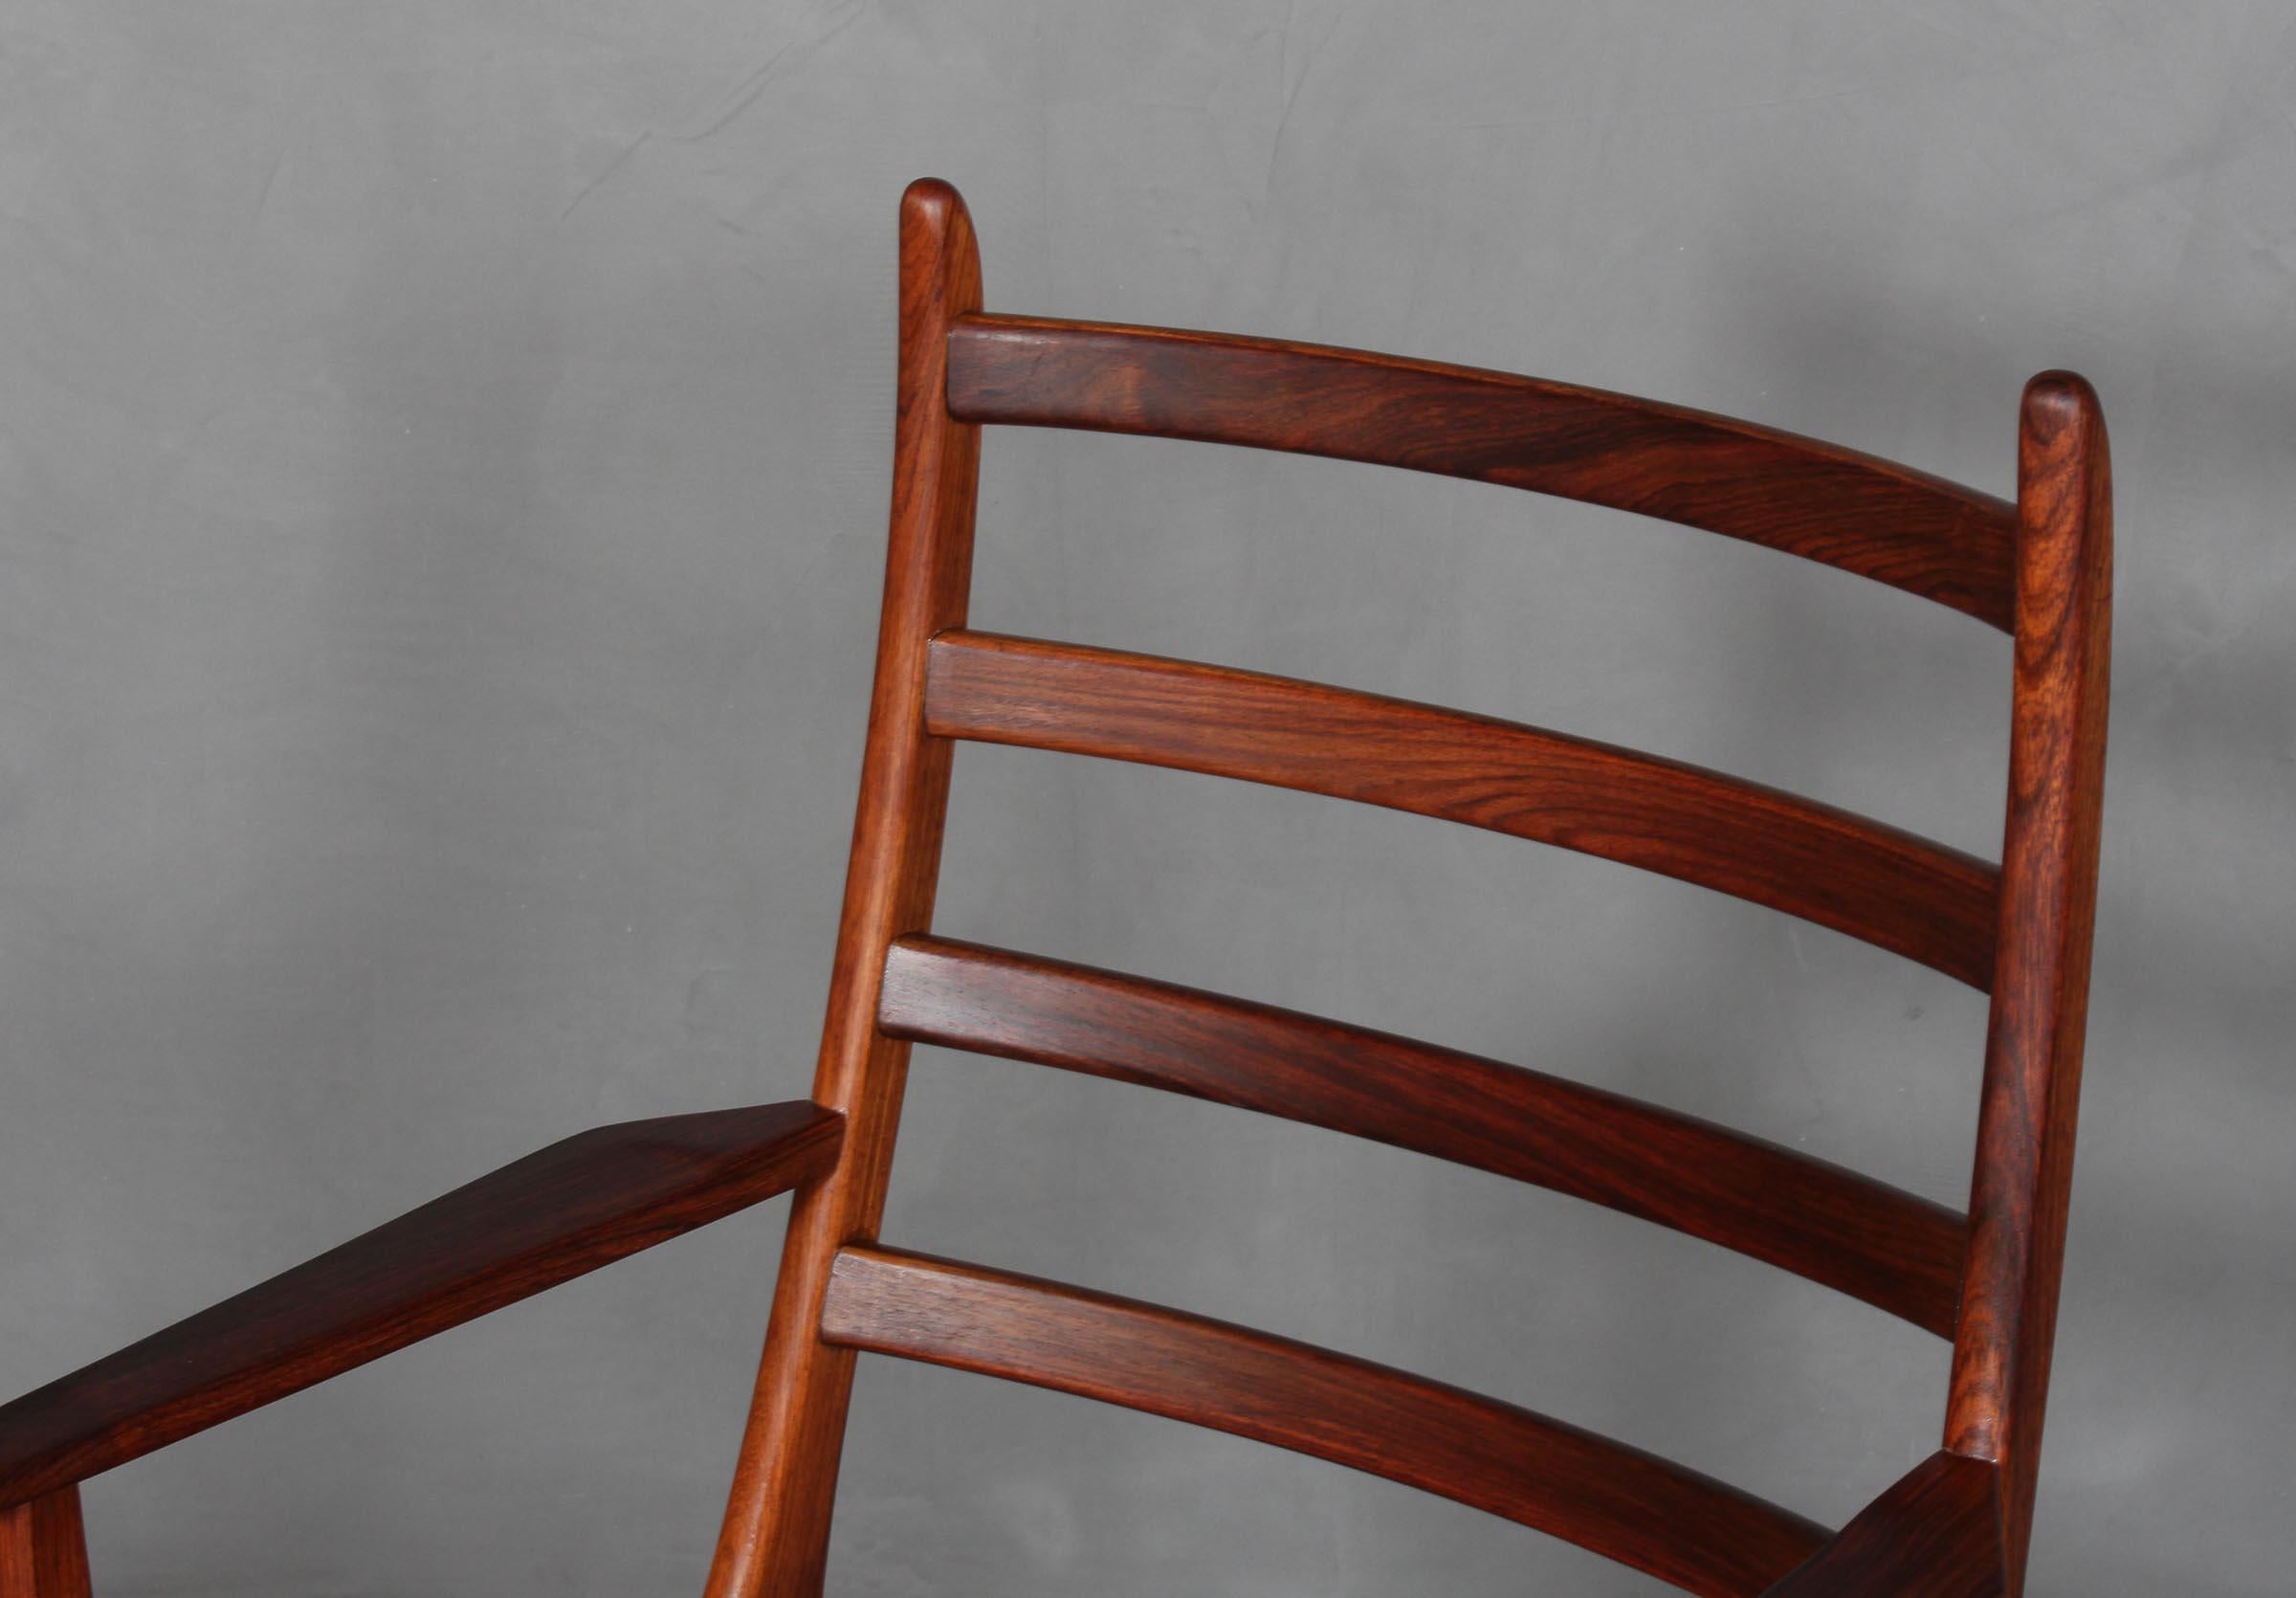 K. S. Møbler armchair in rosewood. New upholstered with aniline leather.

Made in the 1960s.